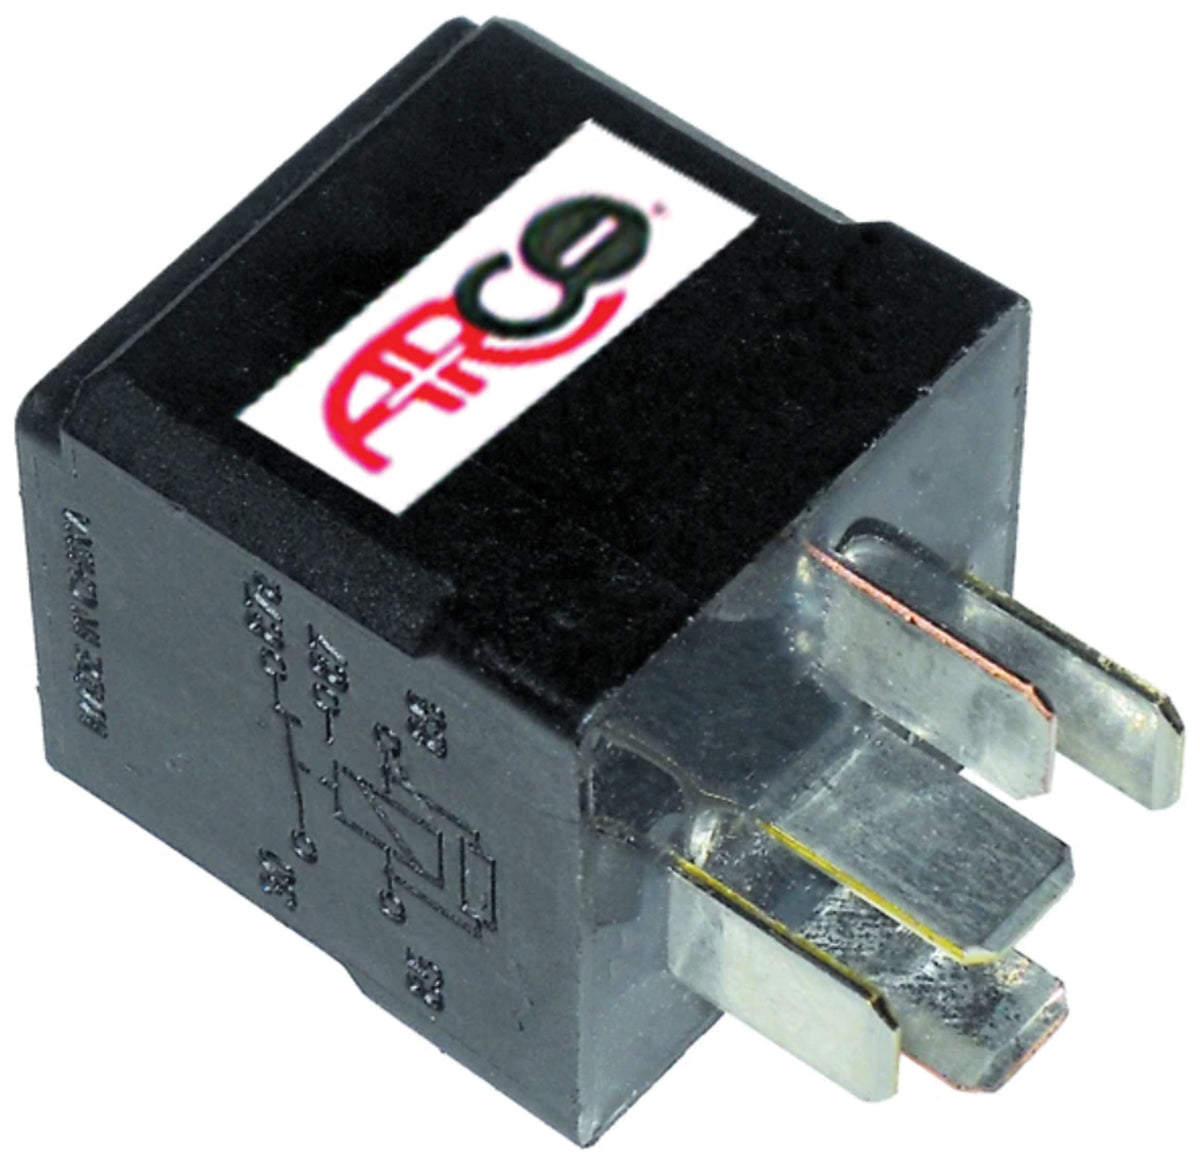 ARCO R809 Relay for Volvo Penta